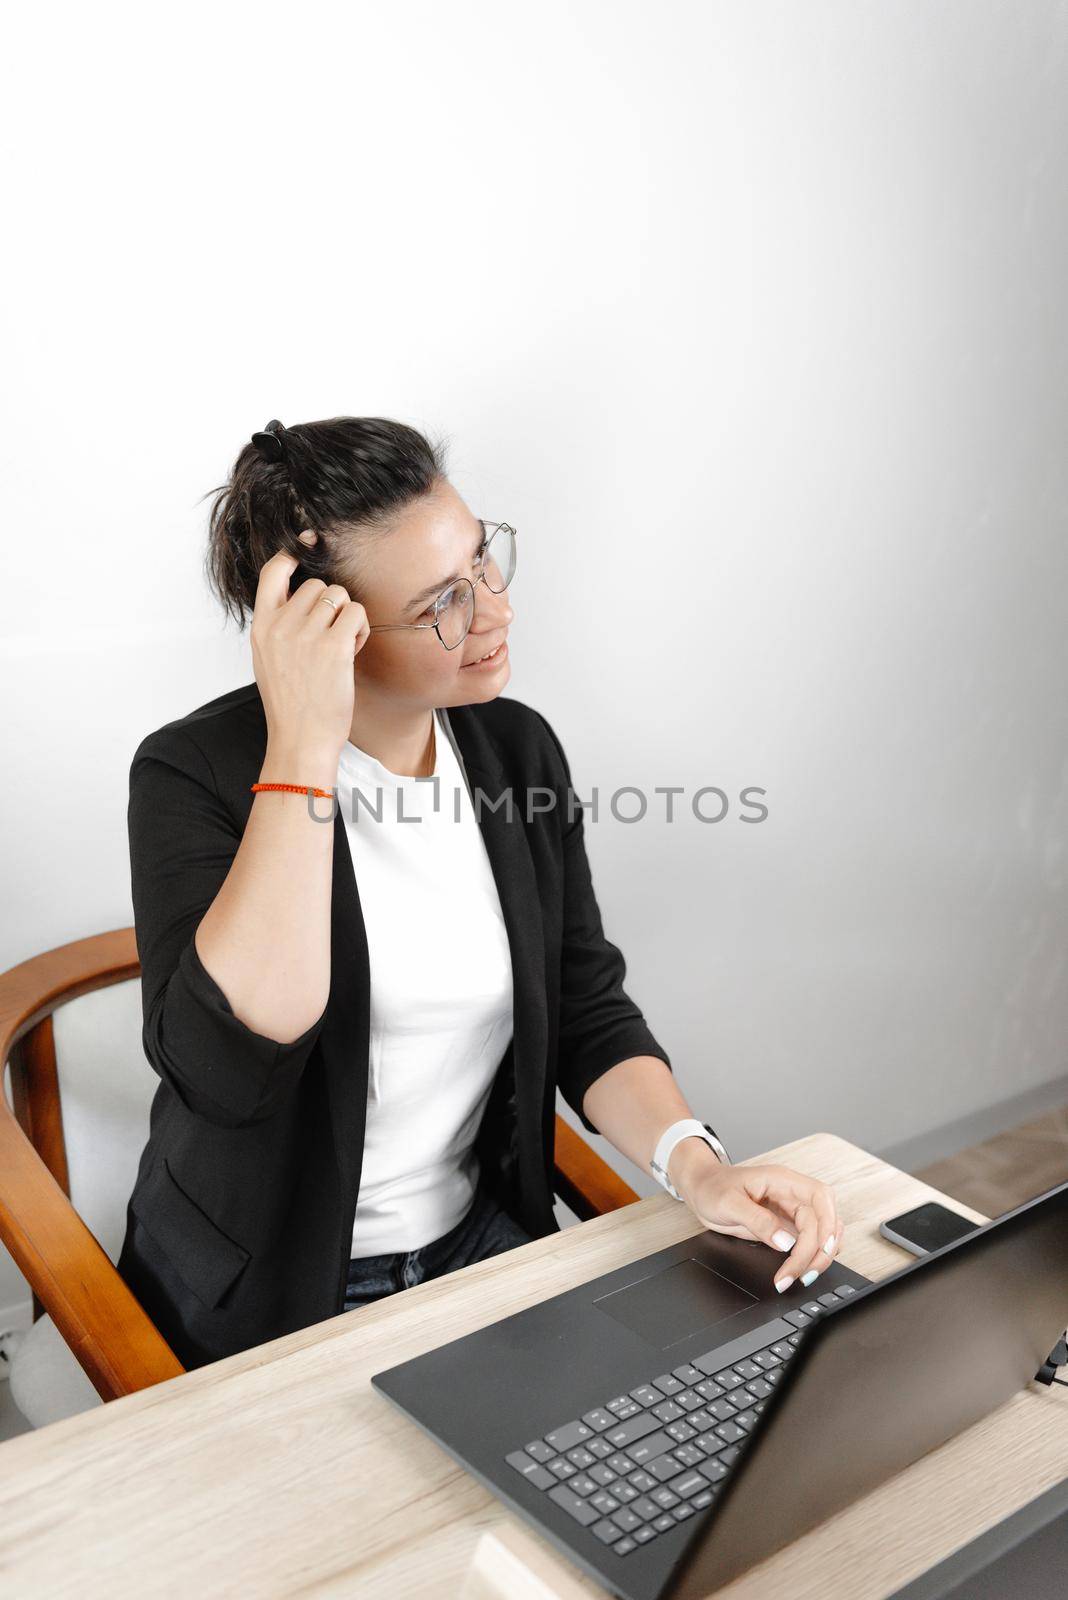 Serious thoughtful young businesswoman economist pondering in the office, wearing a jacket and T-shirt and glasses.